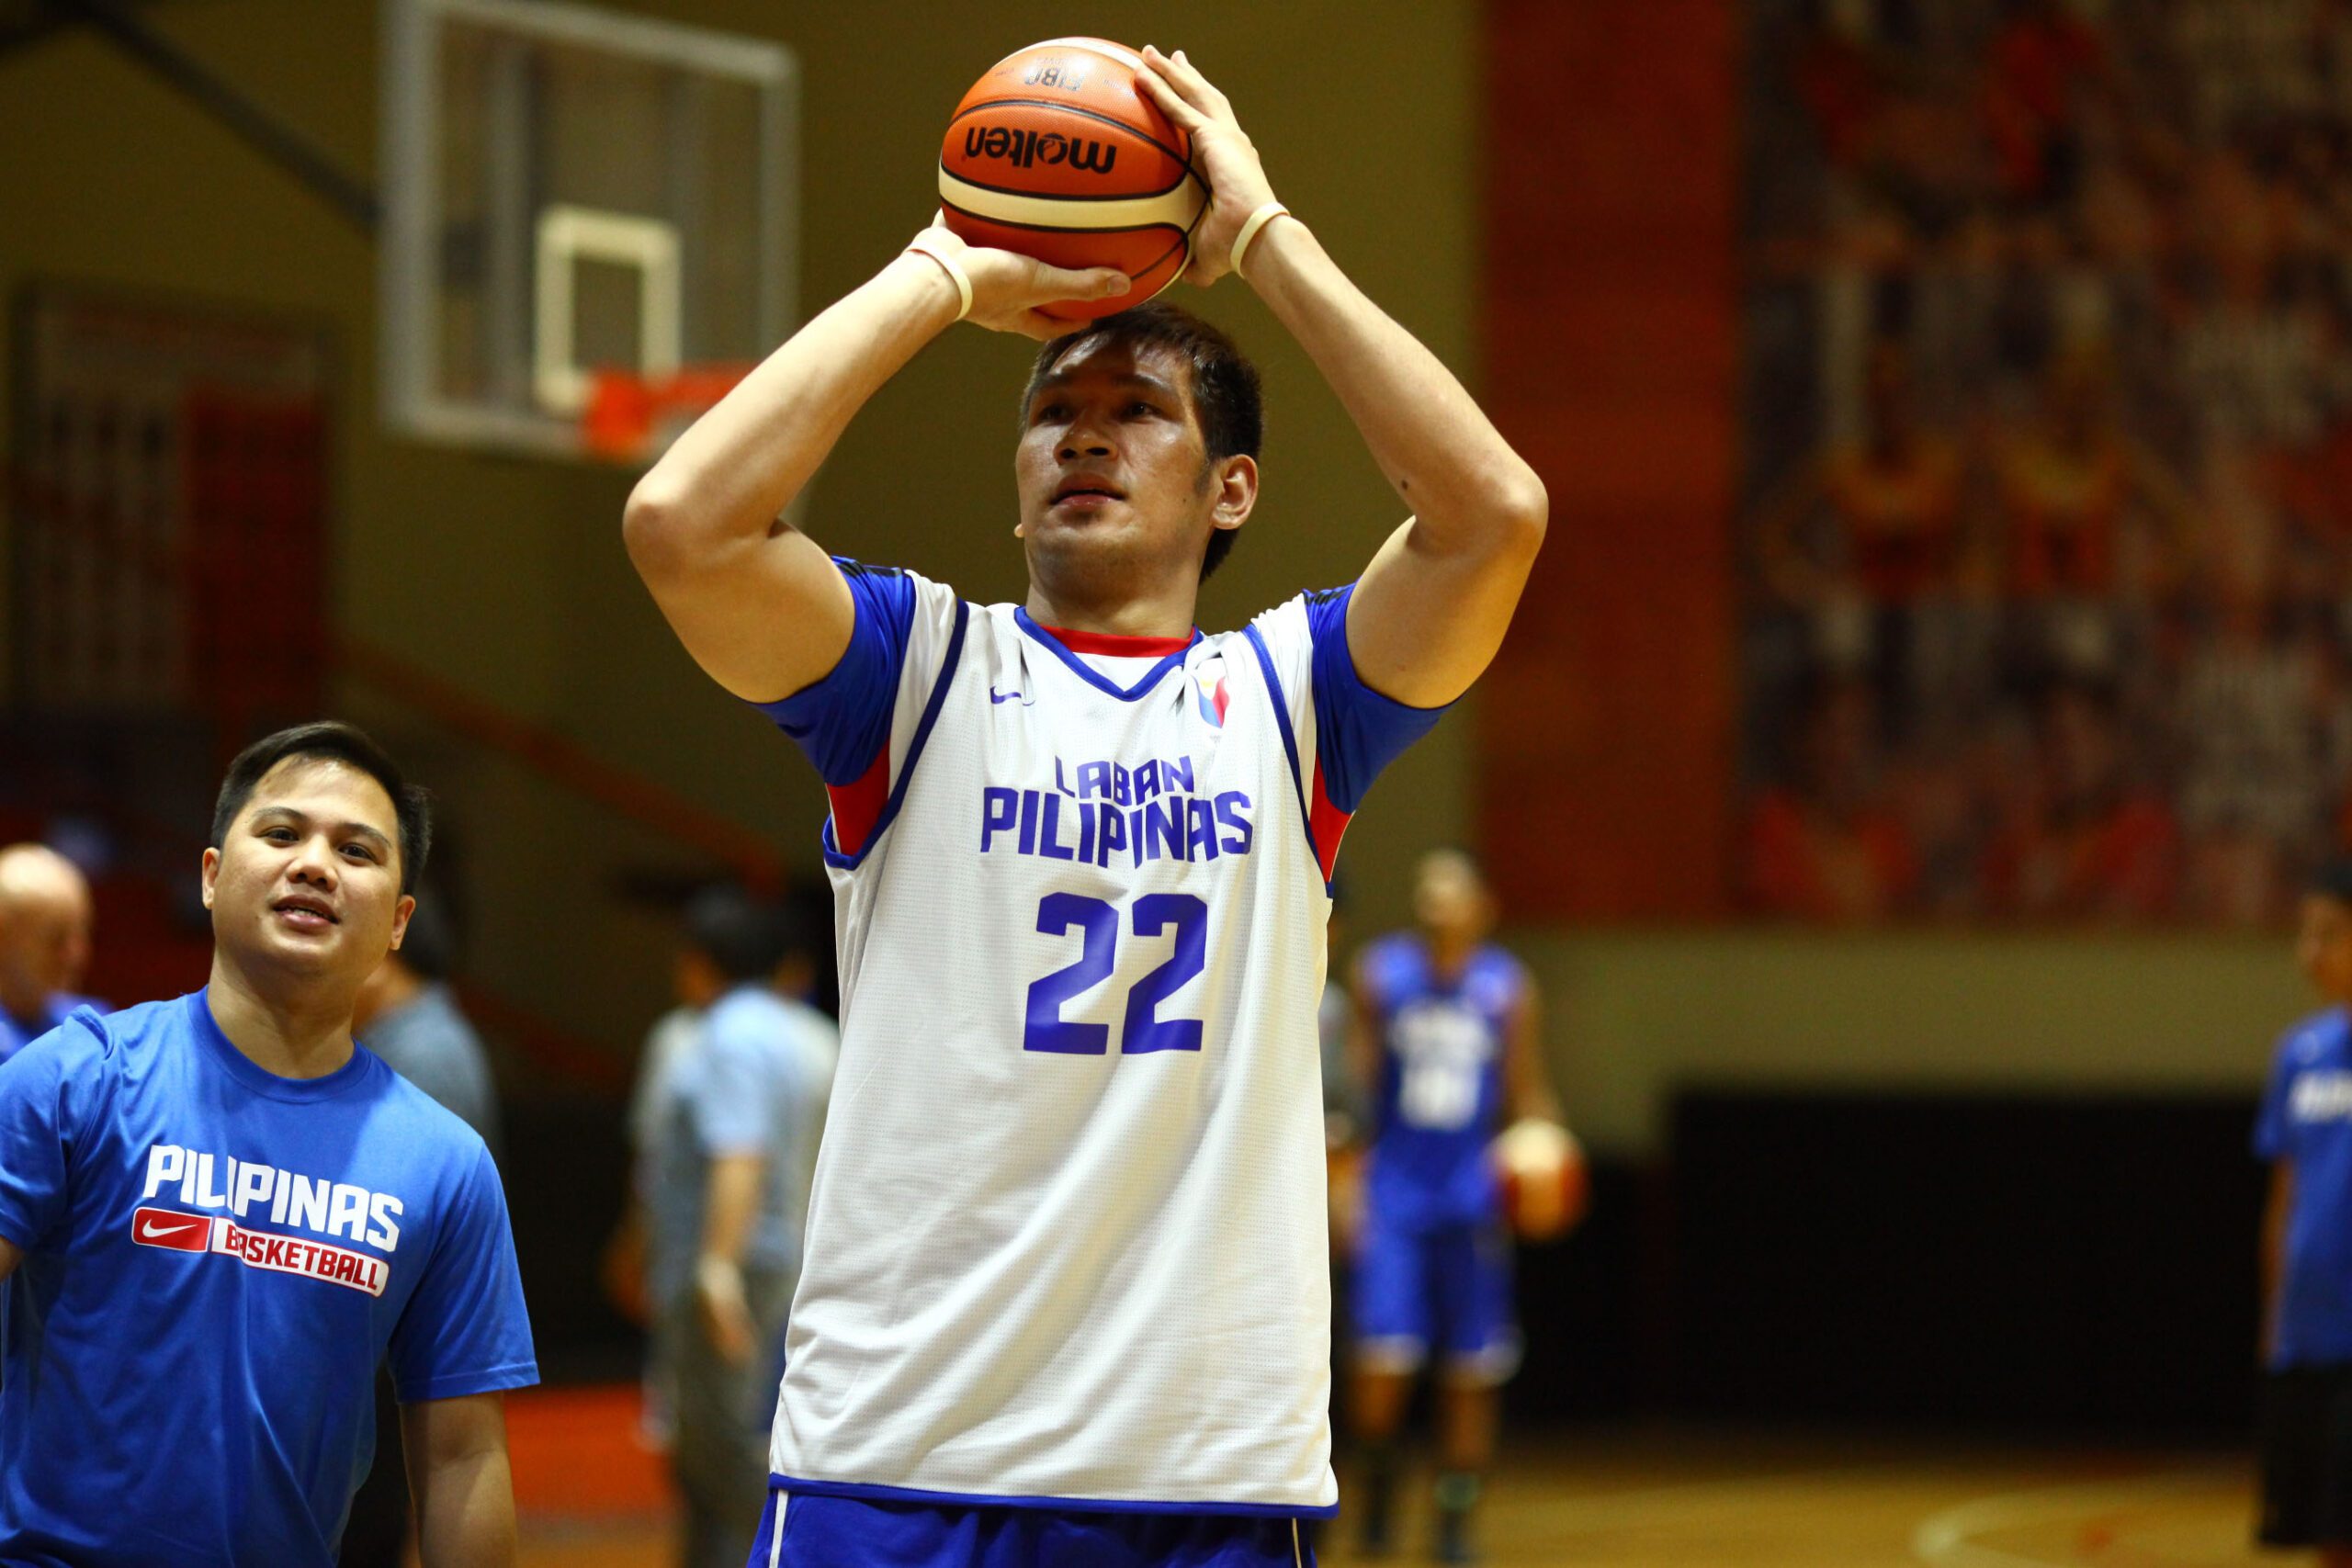 June Mar Fajardo likely out of Gilas lineup due to calf injury